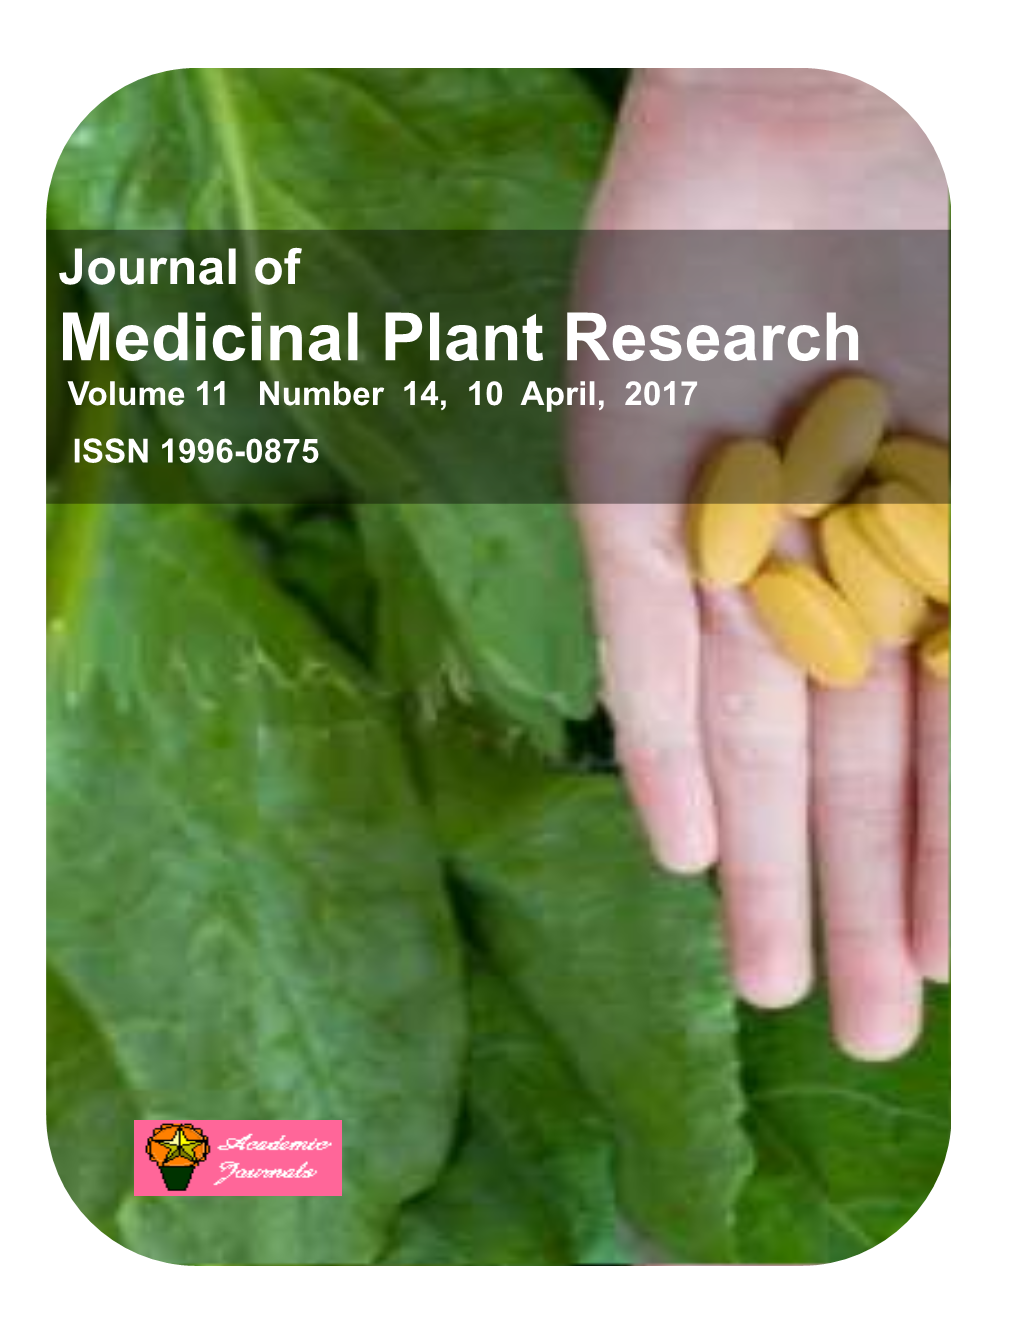 Medicinal Plant Research Volume 11 Number 14, 10 April, 2017 ISSN 1996-0875